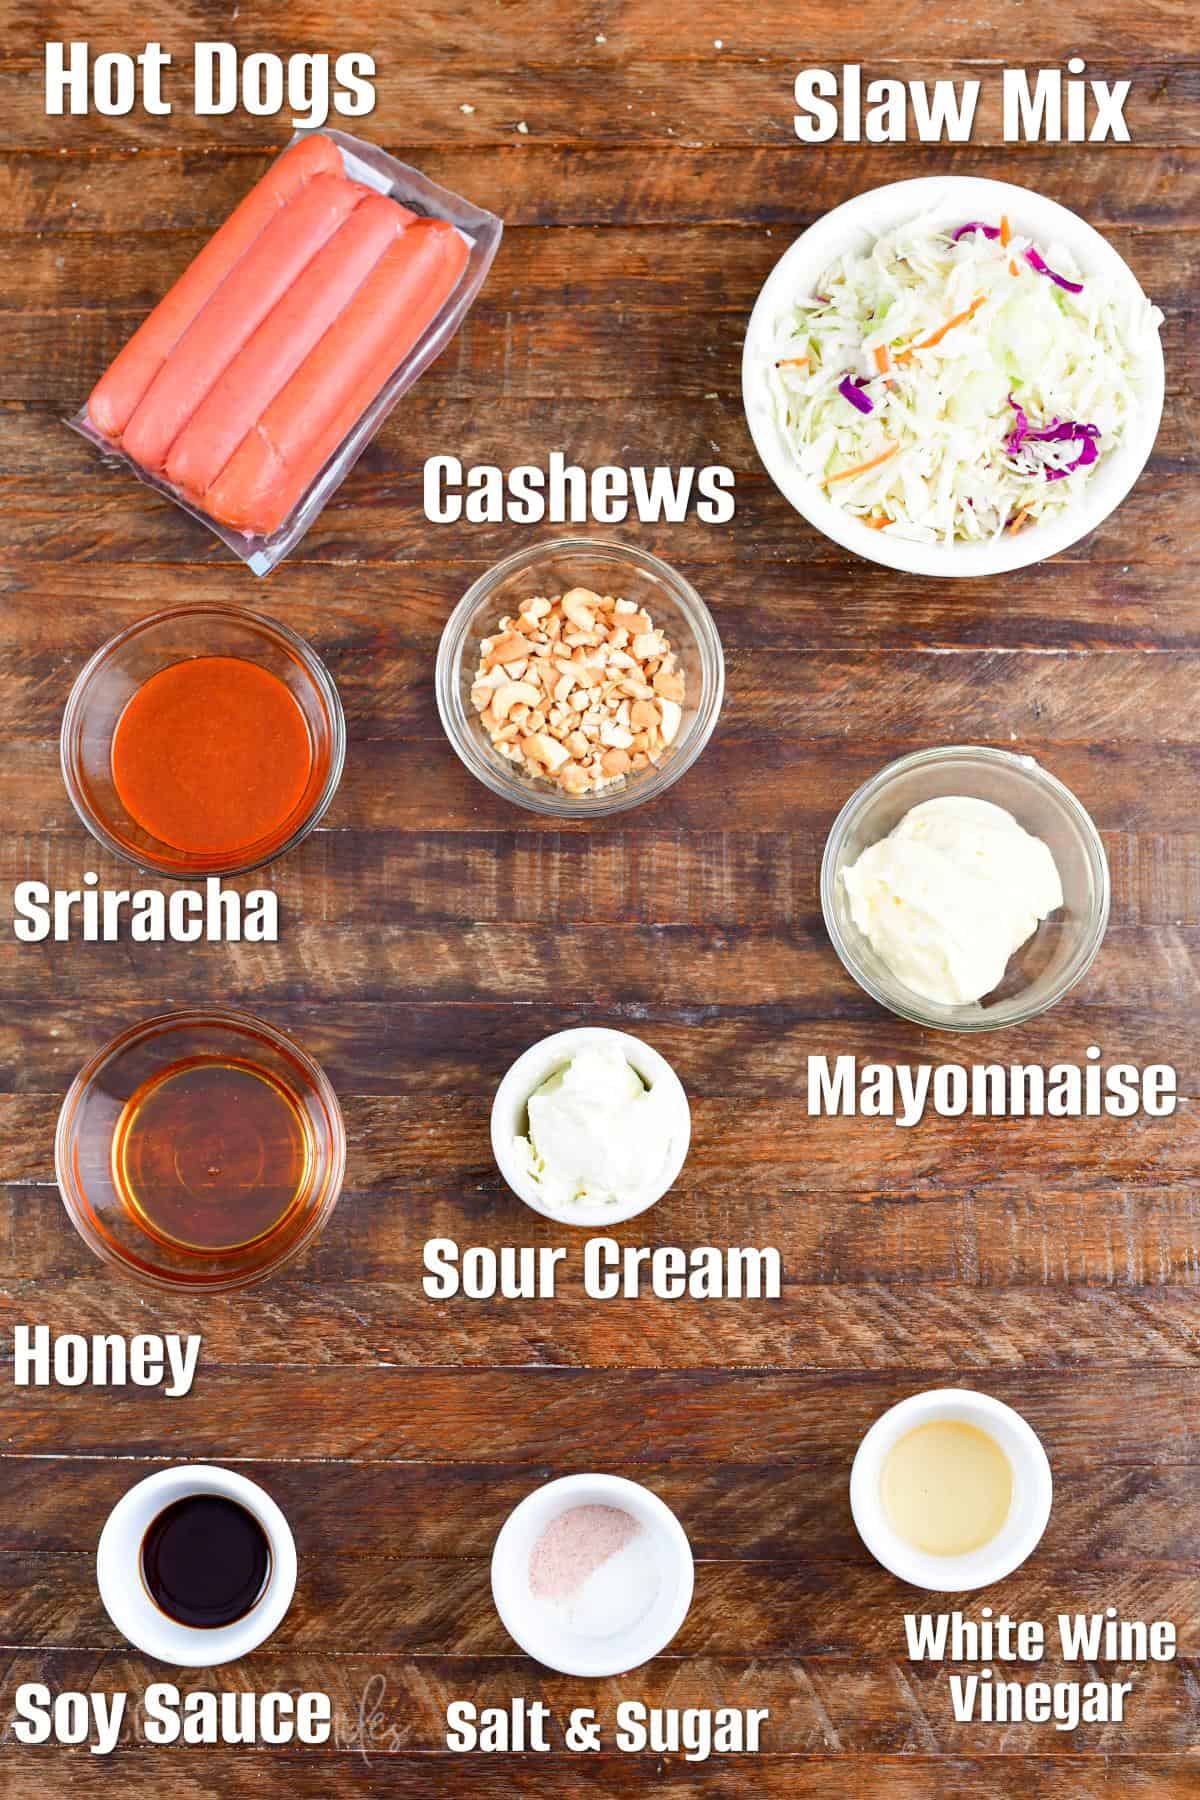 Labeled ingredients for Sriracha Honey Hot Dogs on a wood surface.